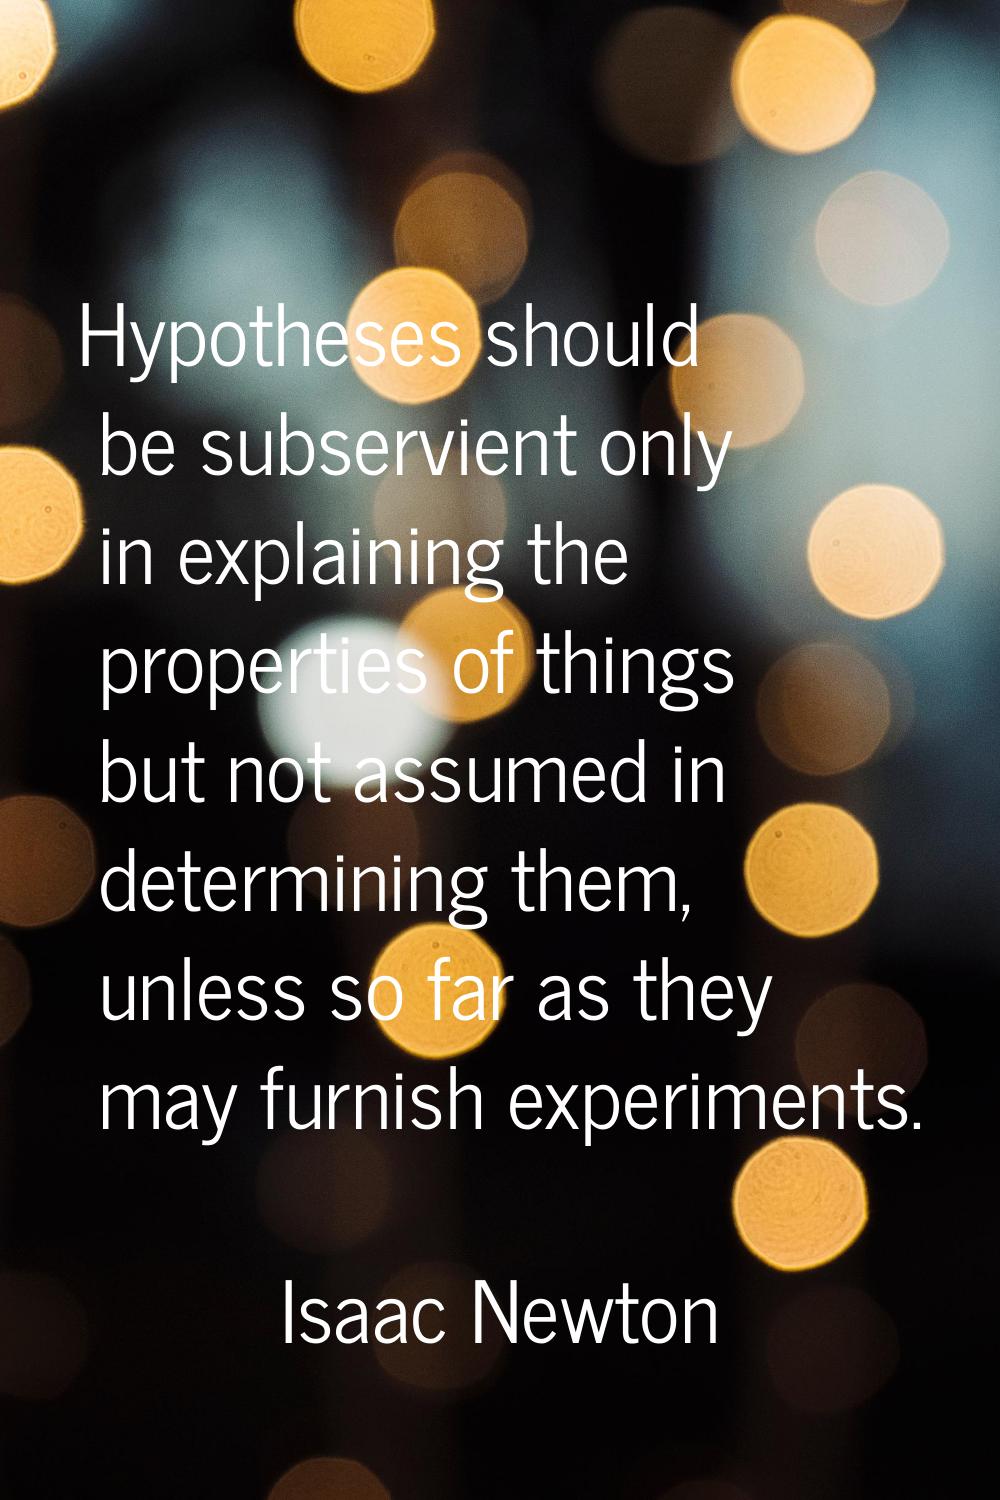 Hypotheses should be subservient only in explaining the properties of things but not assumed in det